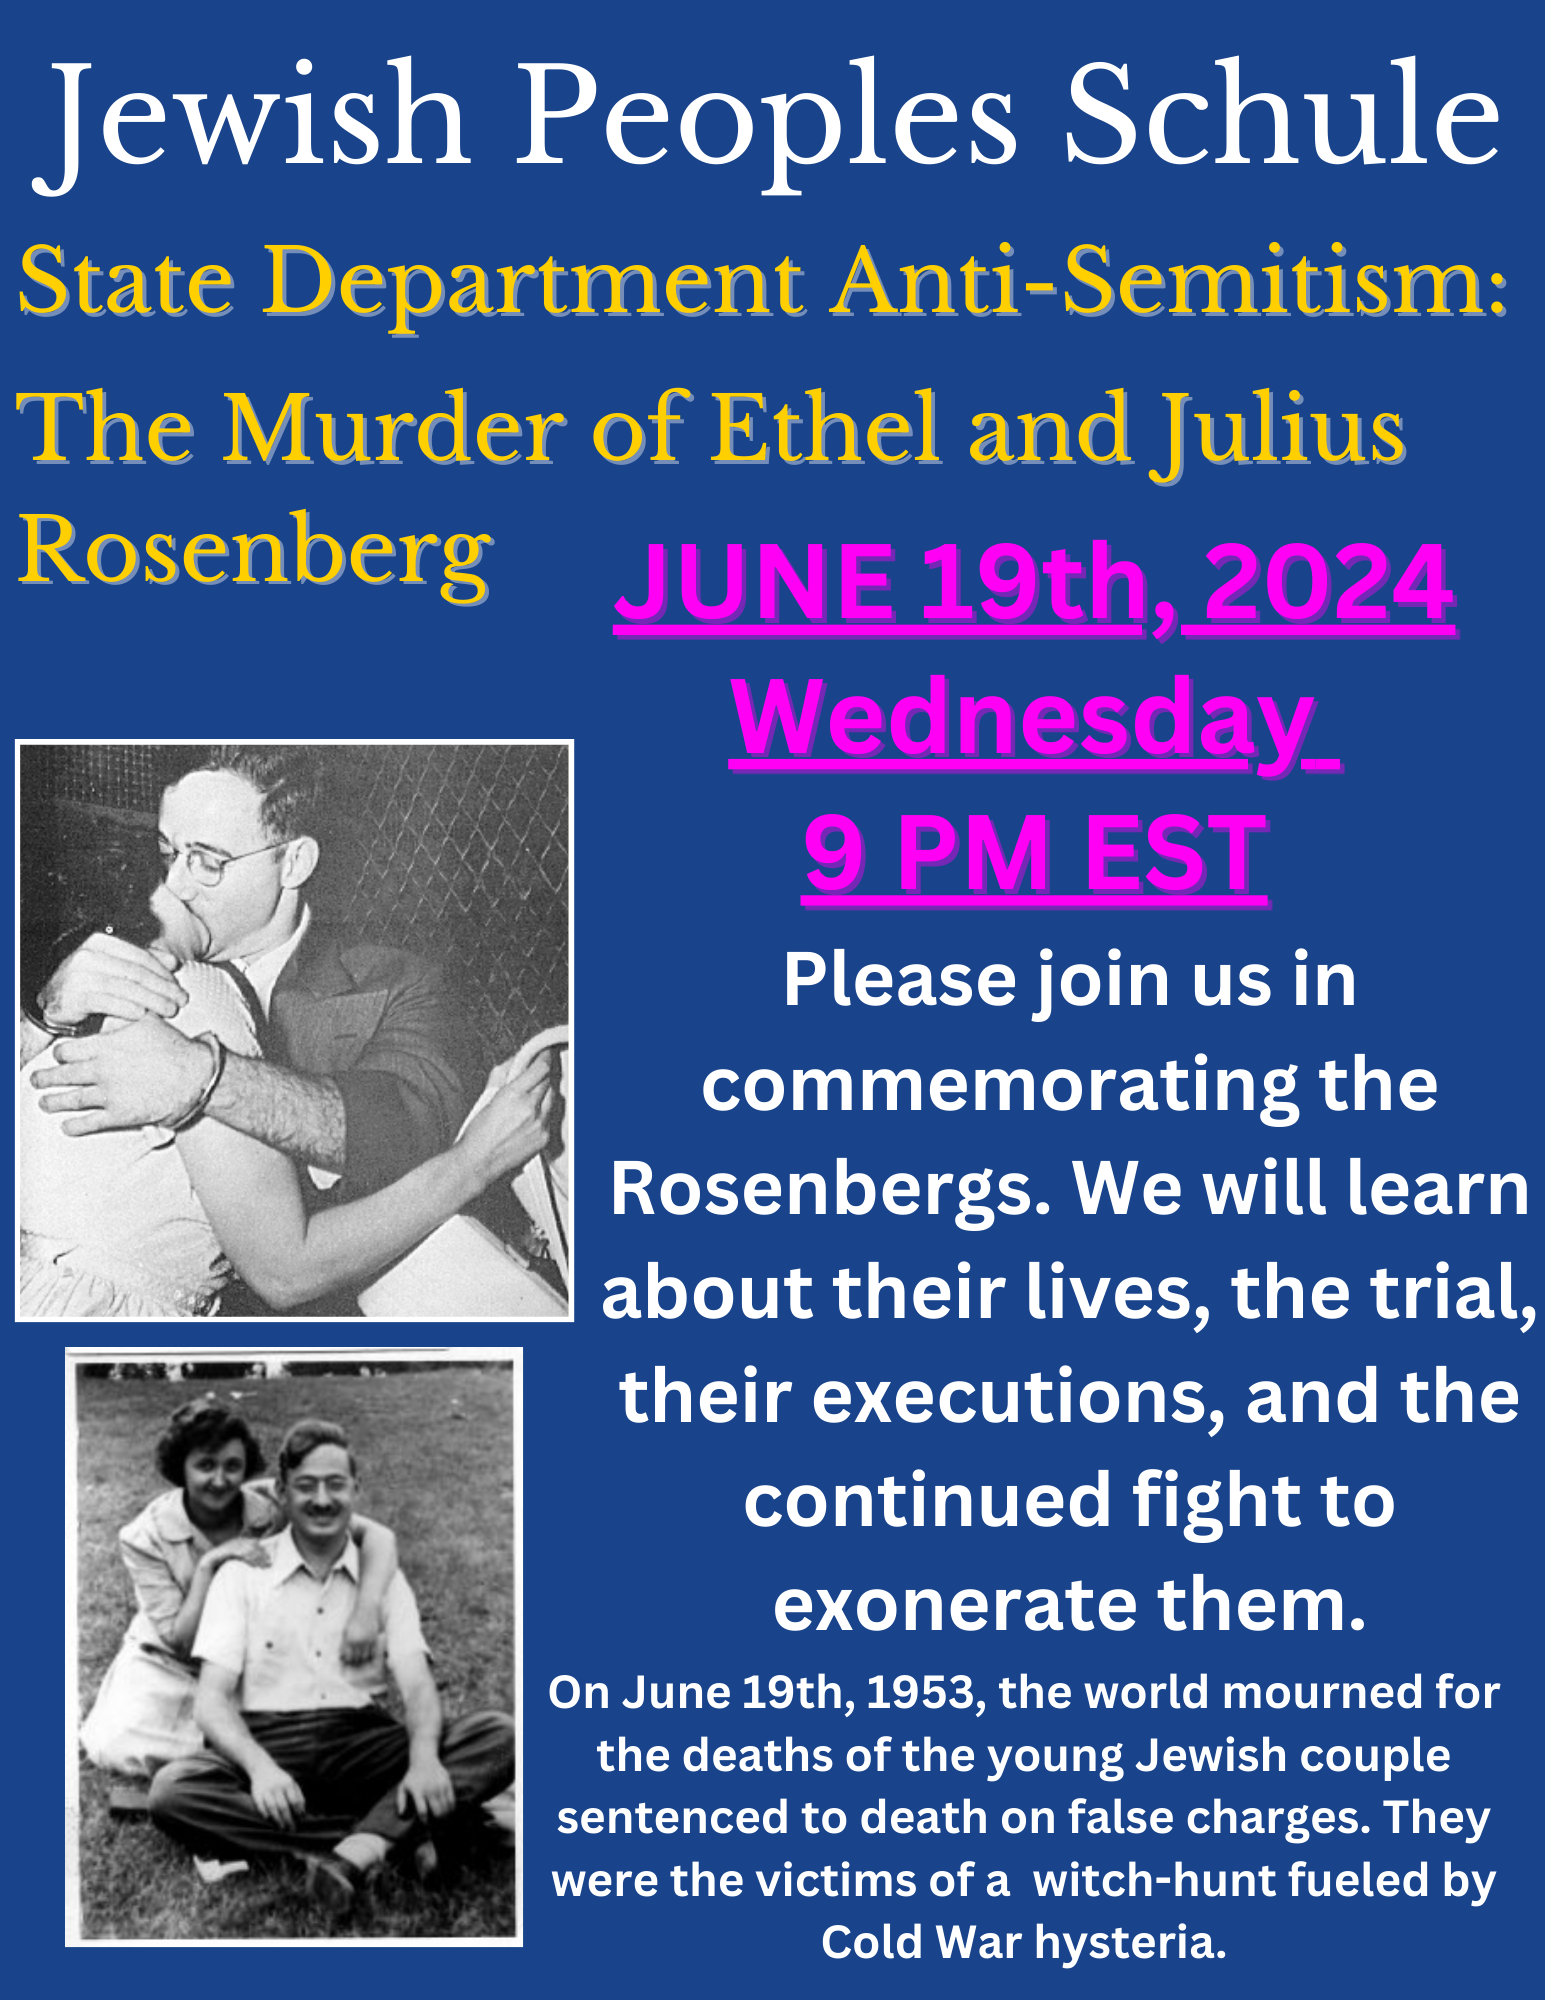 UJPFO’s Jewish Peoples Schule – State Department Anti-Semitism: The Murder of Ethel and Julius Rosenberg June 19th, 2024 Wednesday 9 PM EST